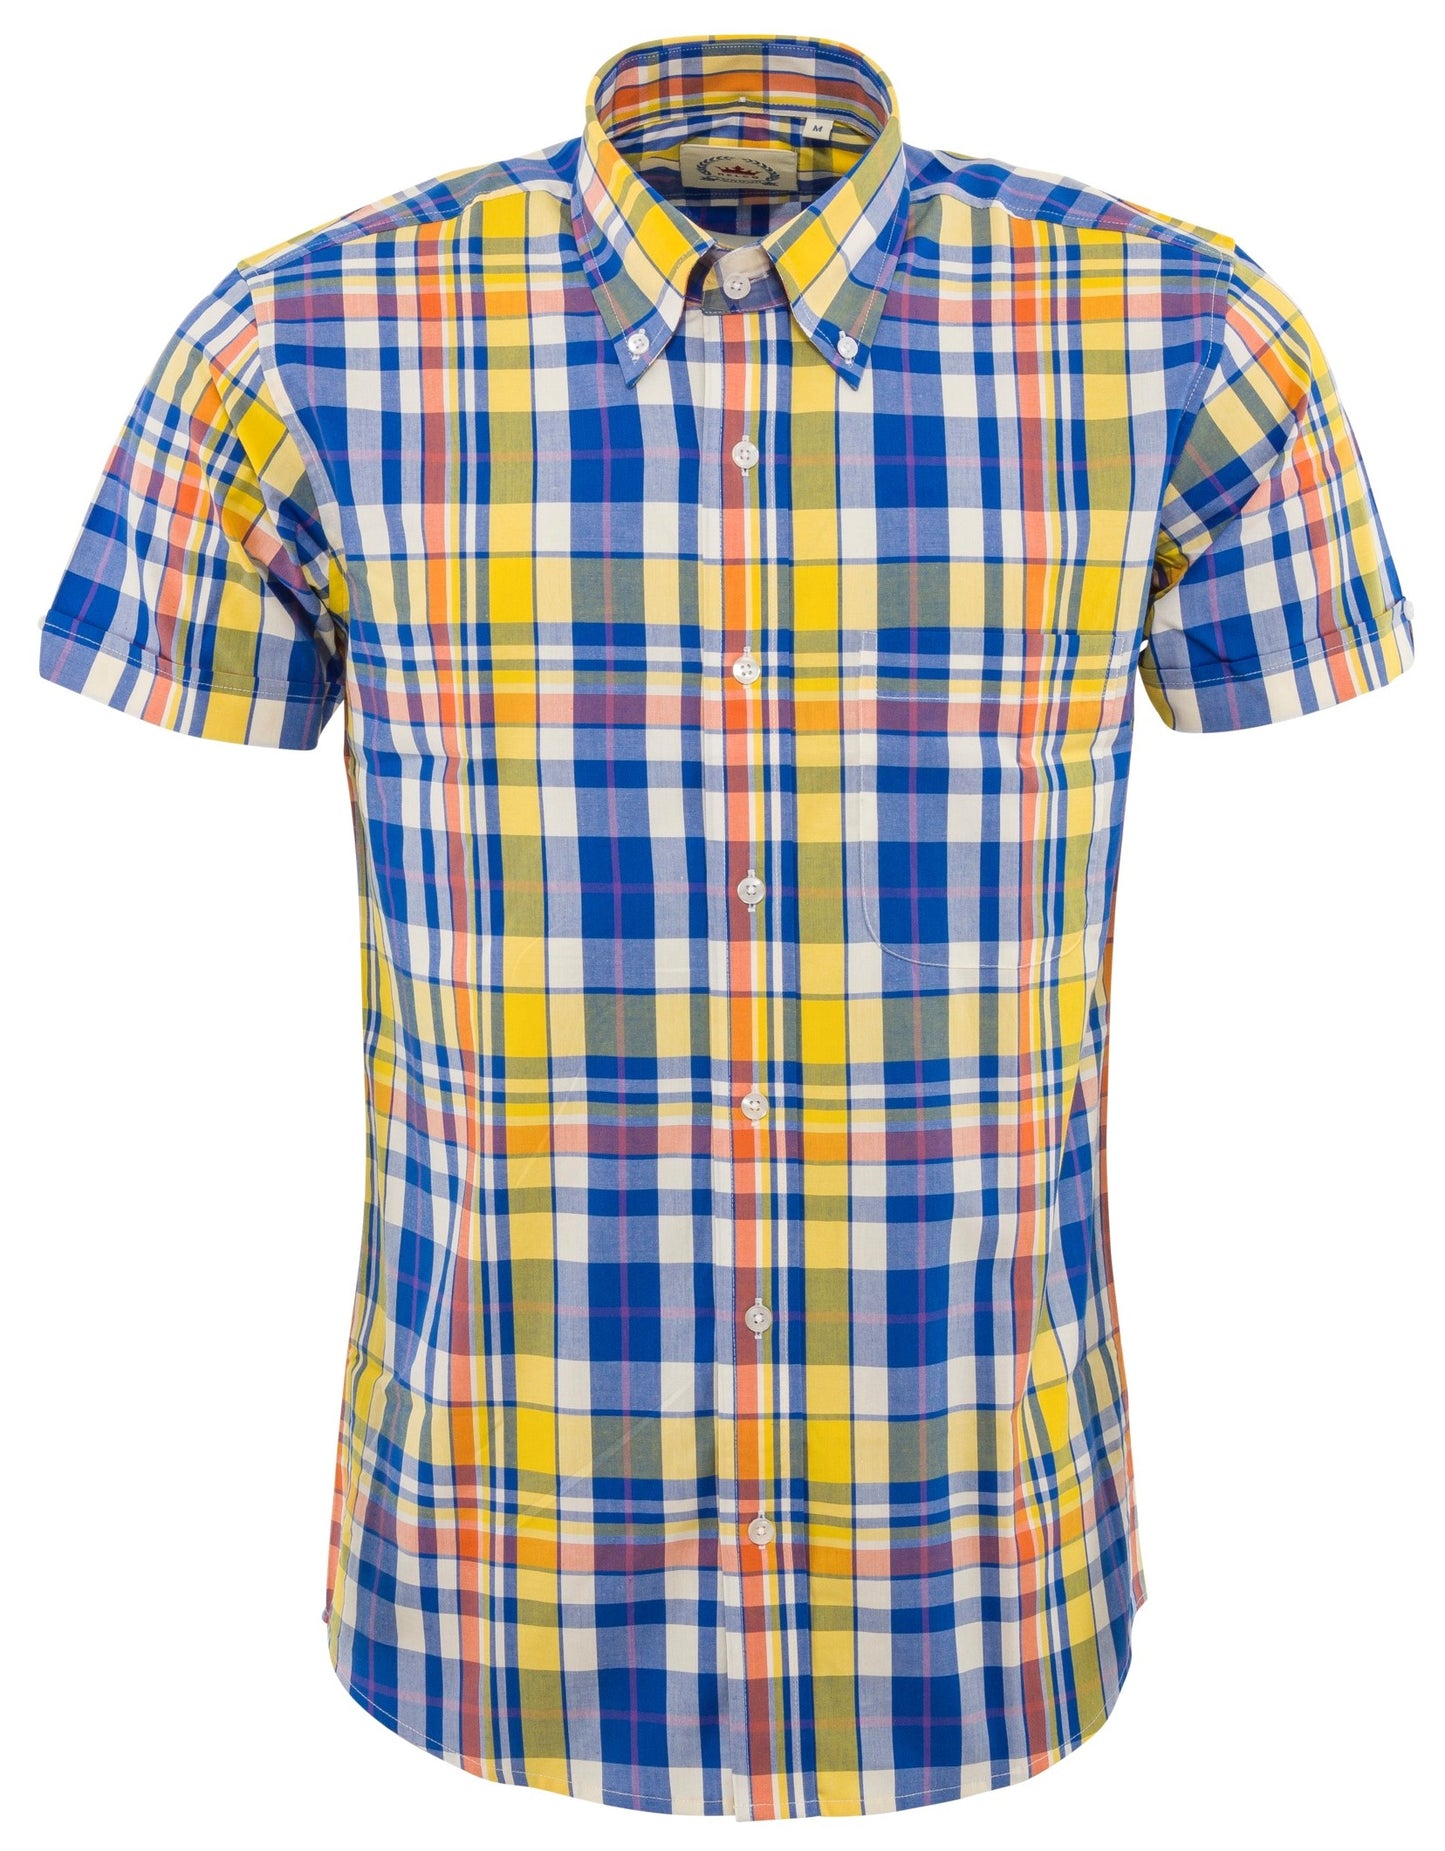 Relco Mens Blue & Yellow Checked Short Sleeved Button Down Shirts